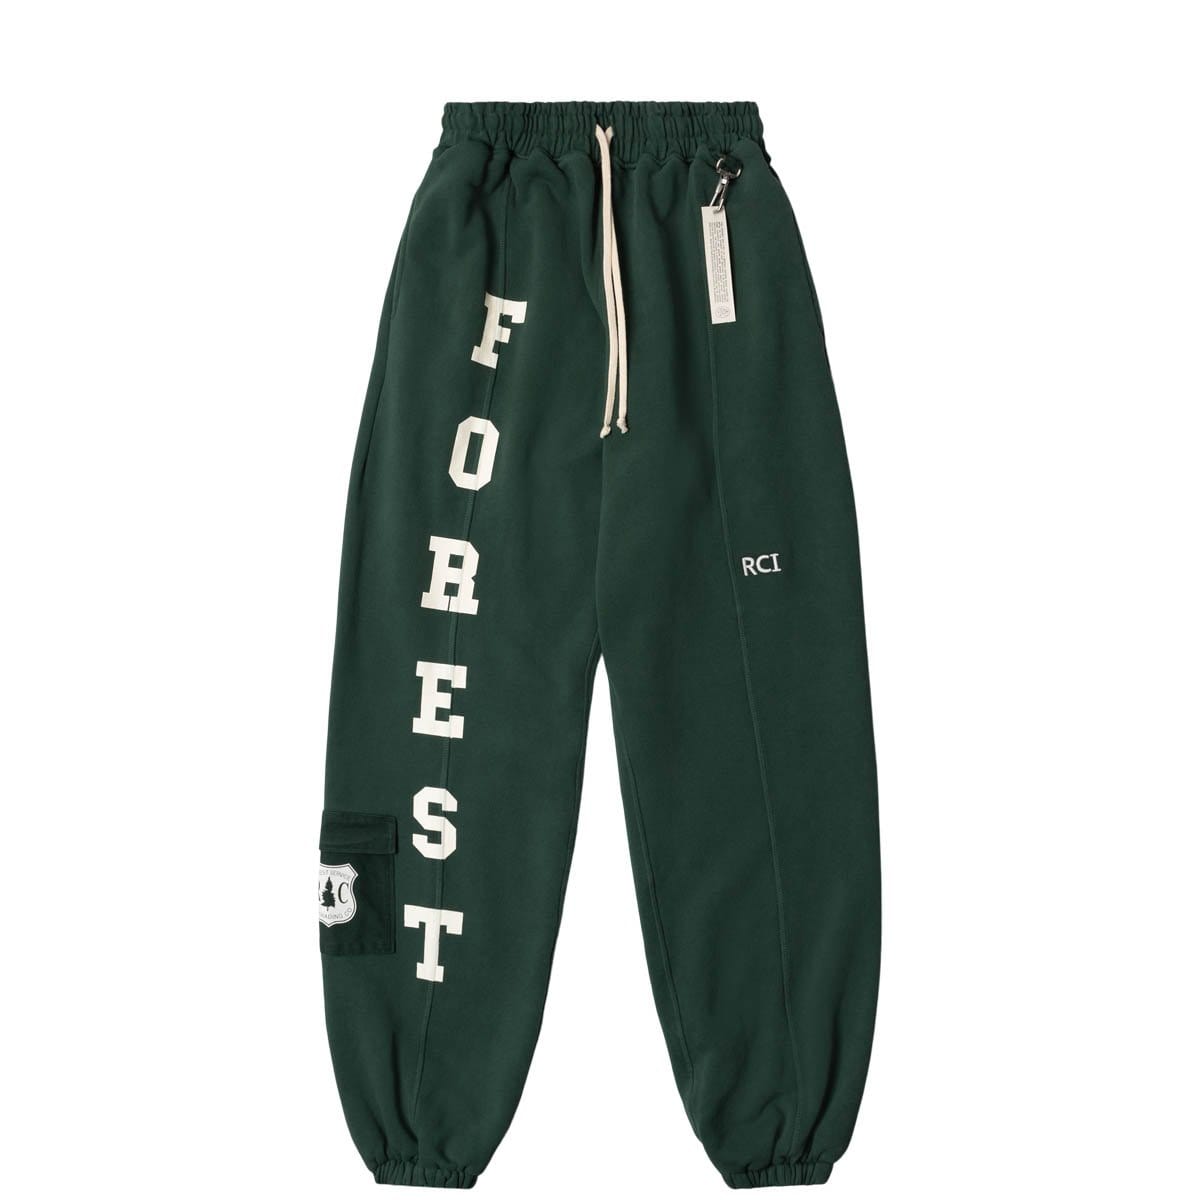 Reese Cooper Bottoms RCI FOREST SWEATPANTS